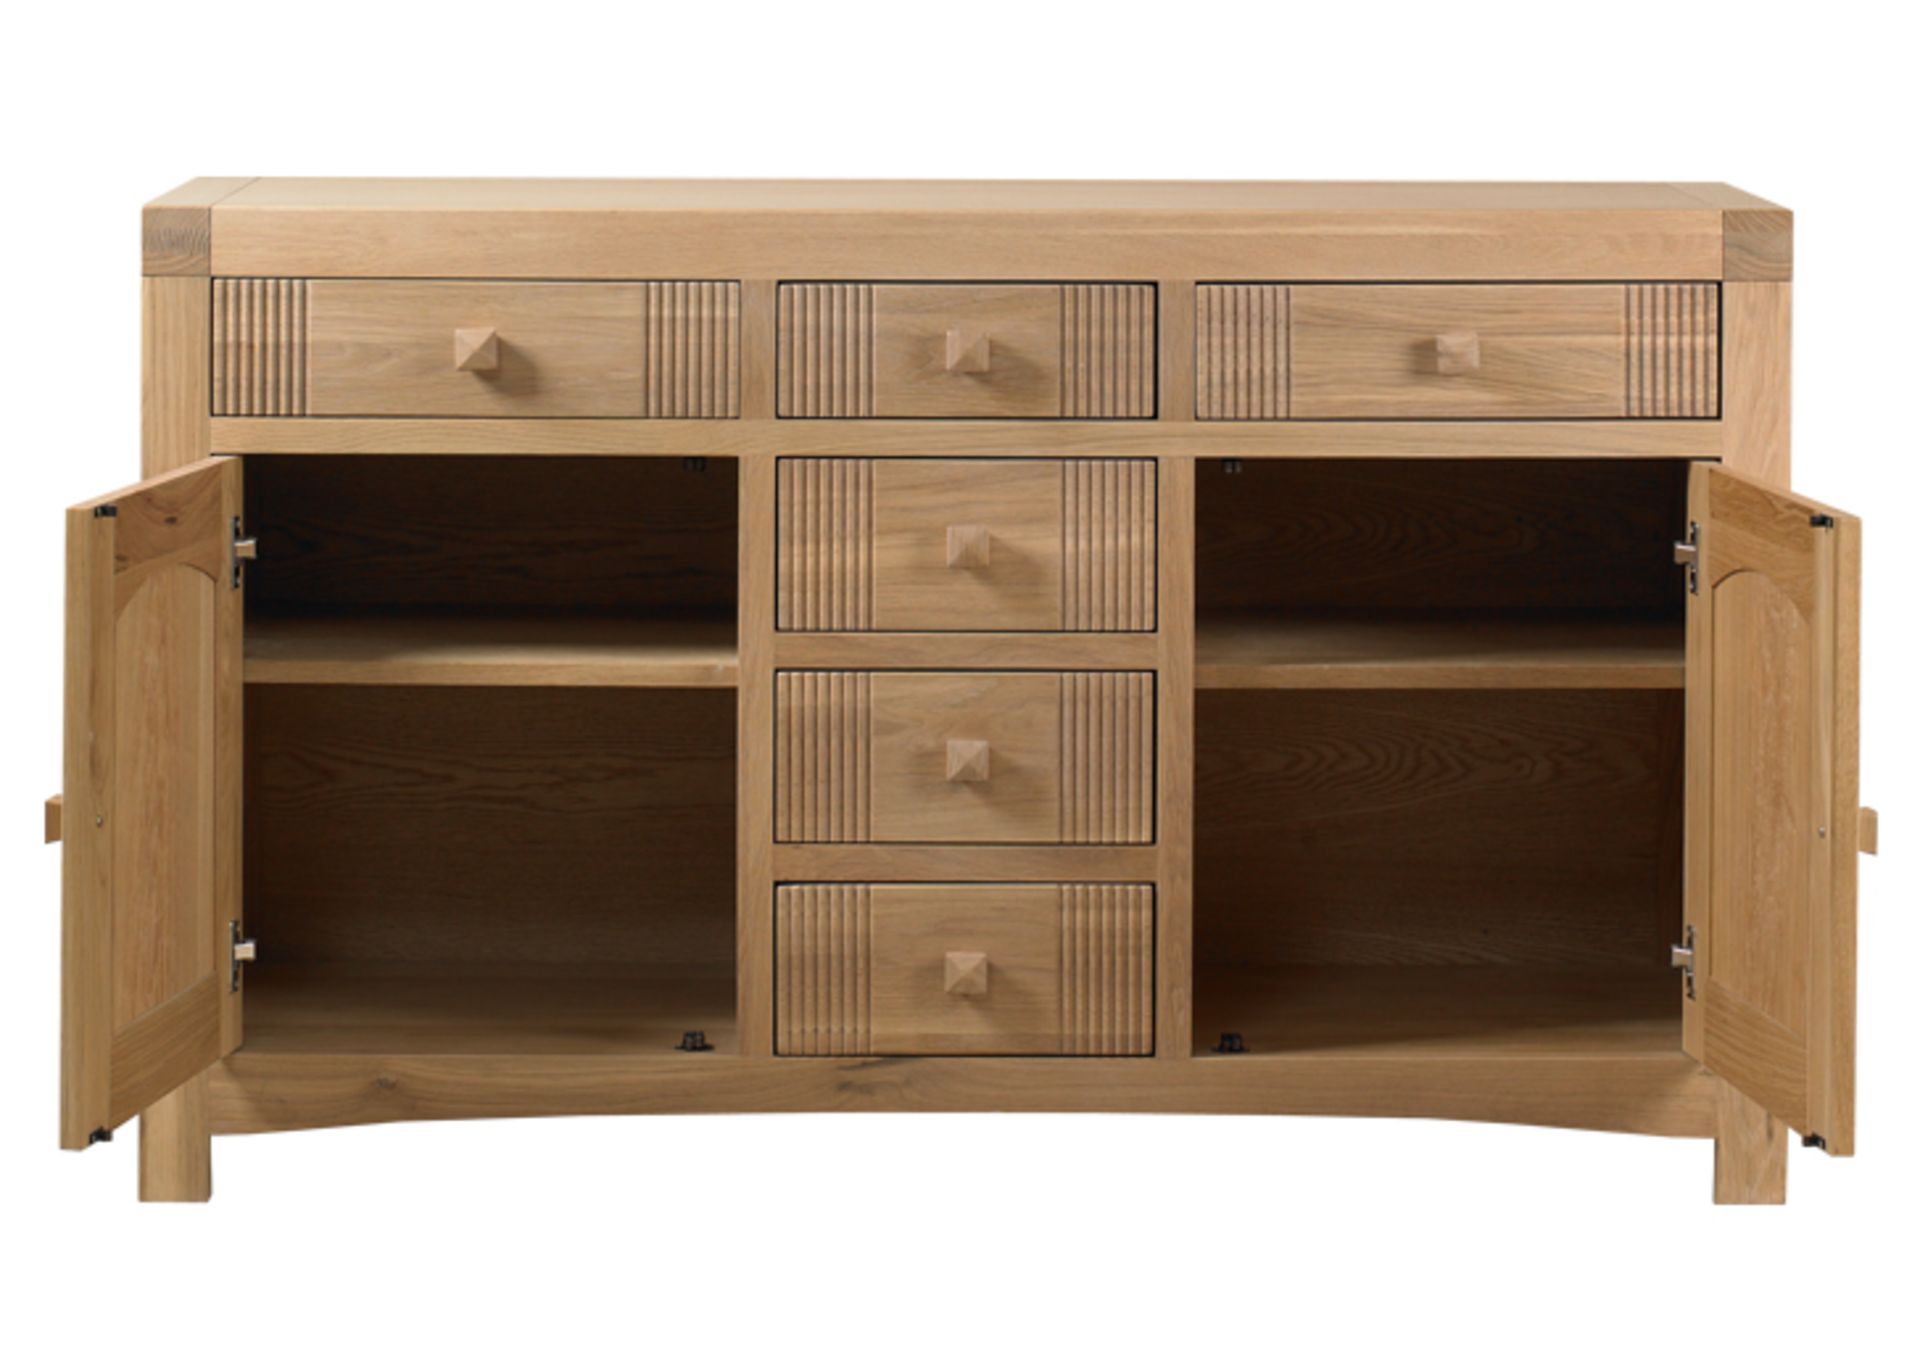 1 x Mark Webster Buckingham Large Sideboad - Two Door/Six Drawer - White Wash Oak With a Timeless - Image 4 of 5